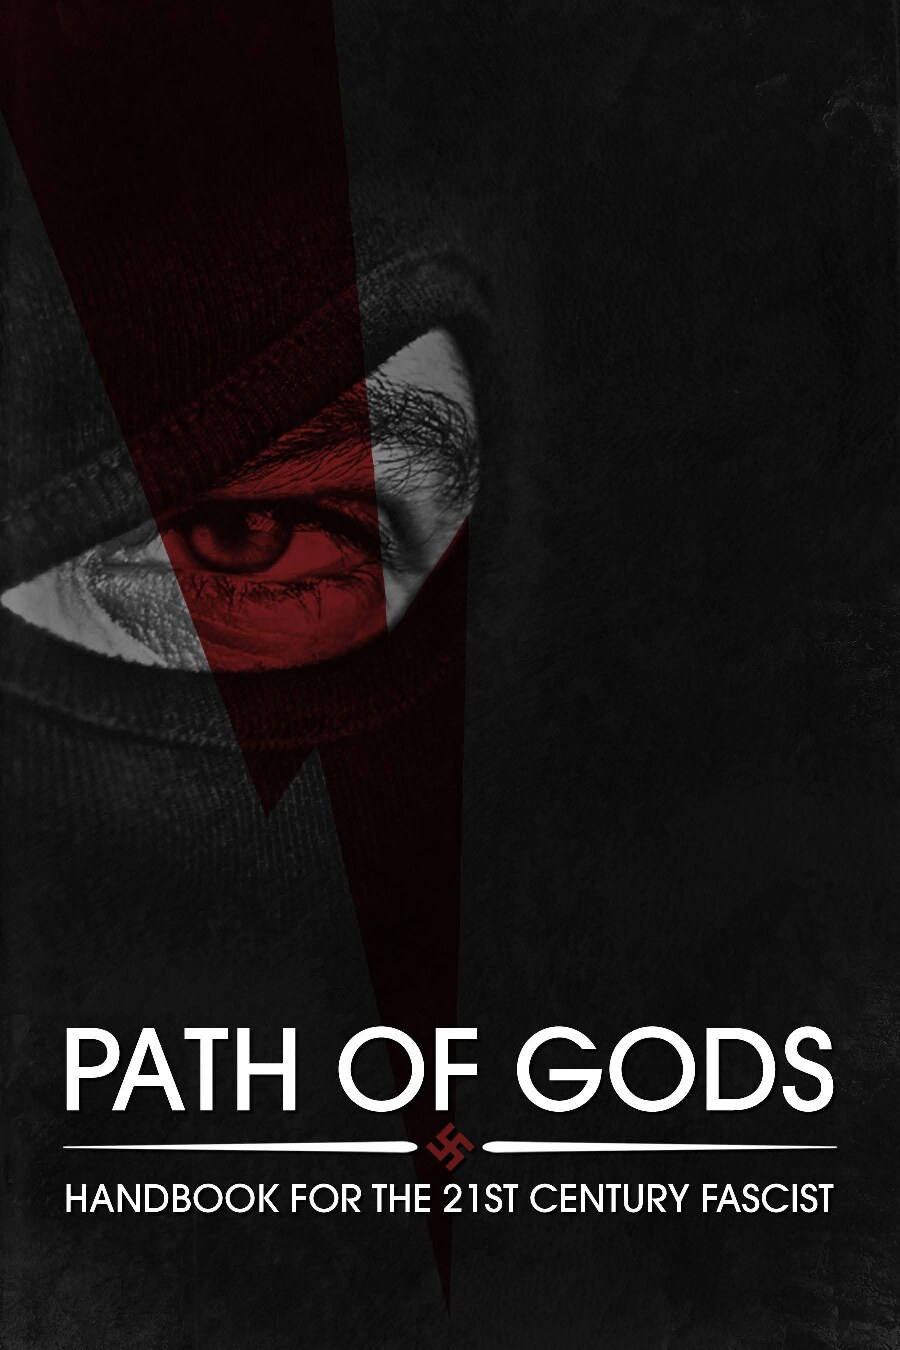 Wewelsburg Archives; Path of Gods - Handbook for the 21st Century Fascist